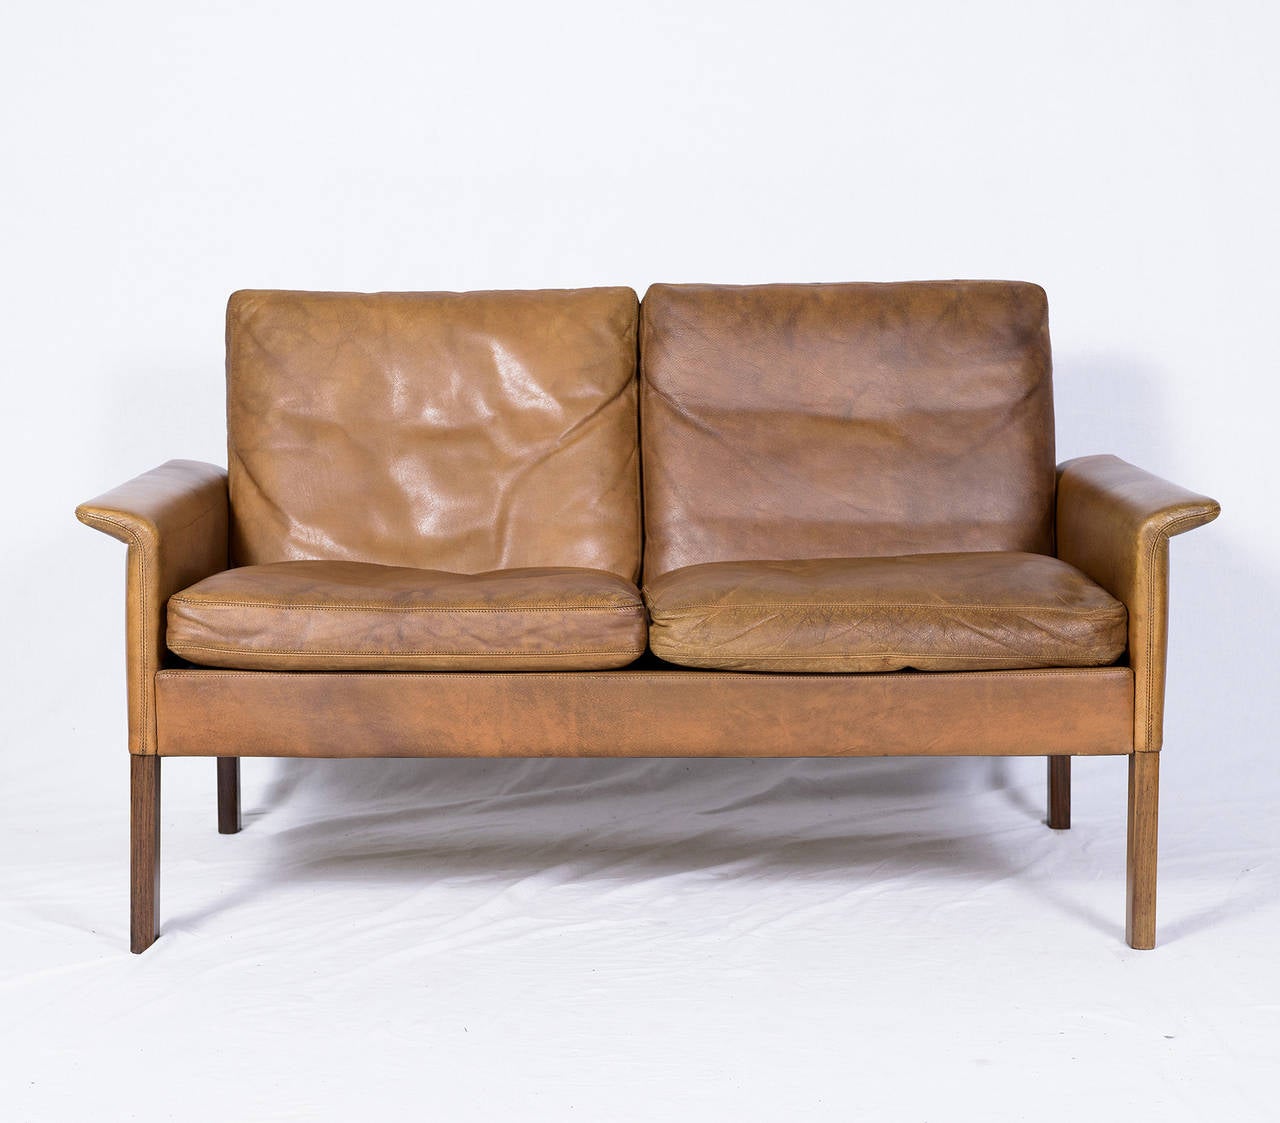 Hans Olsen leather settee designed in 1962 and produced by C. S. Mobler.